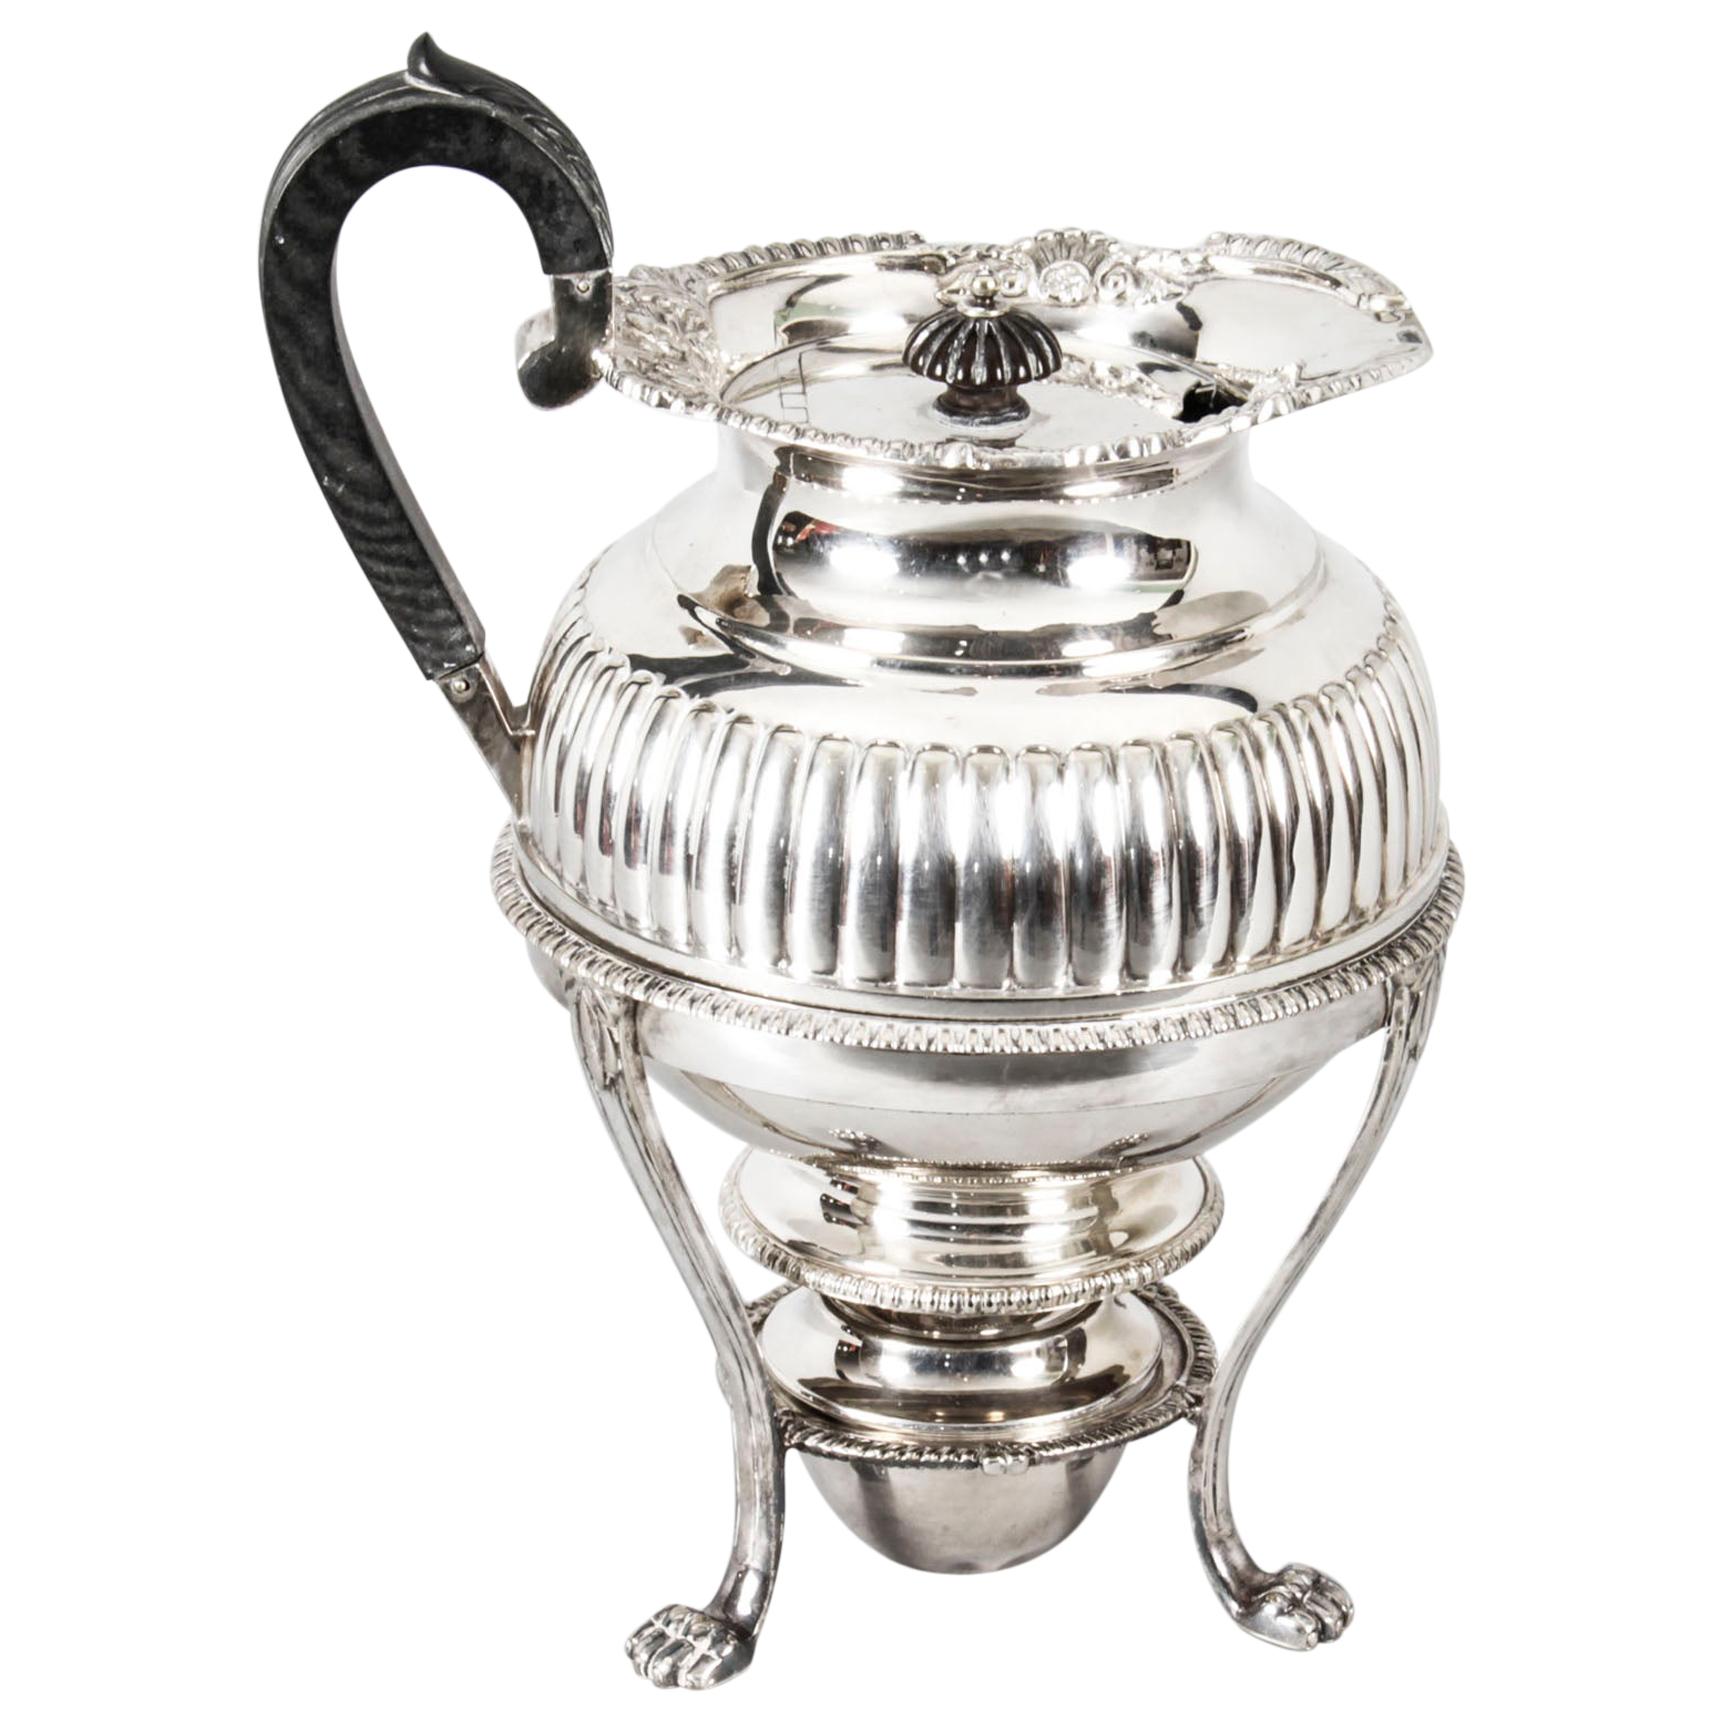 Antique Silver Plate Coffee Biggin on Stand by Elkington, 19th Century